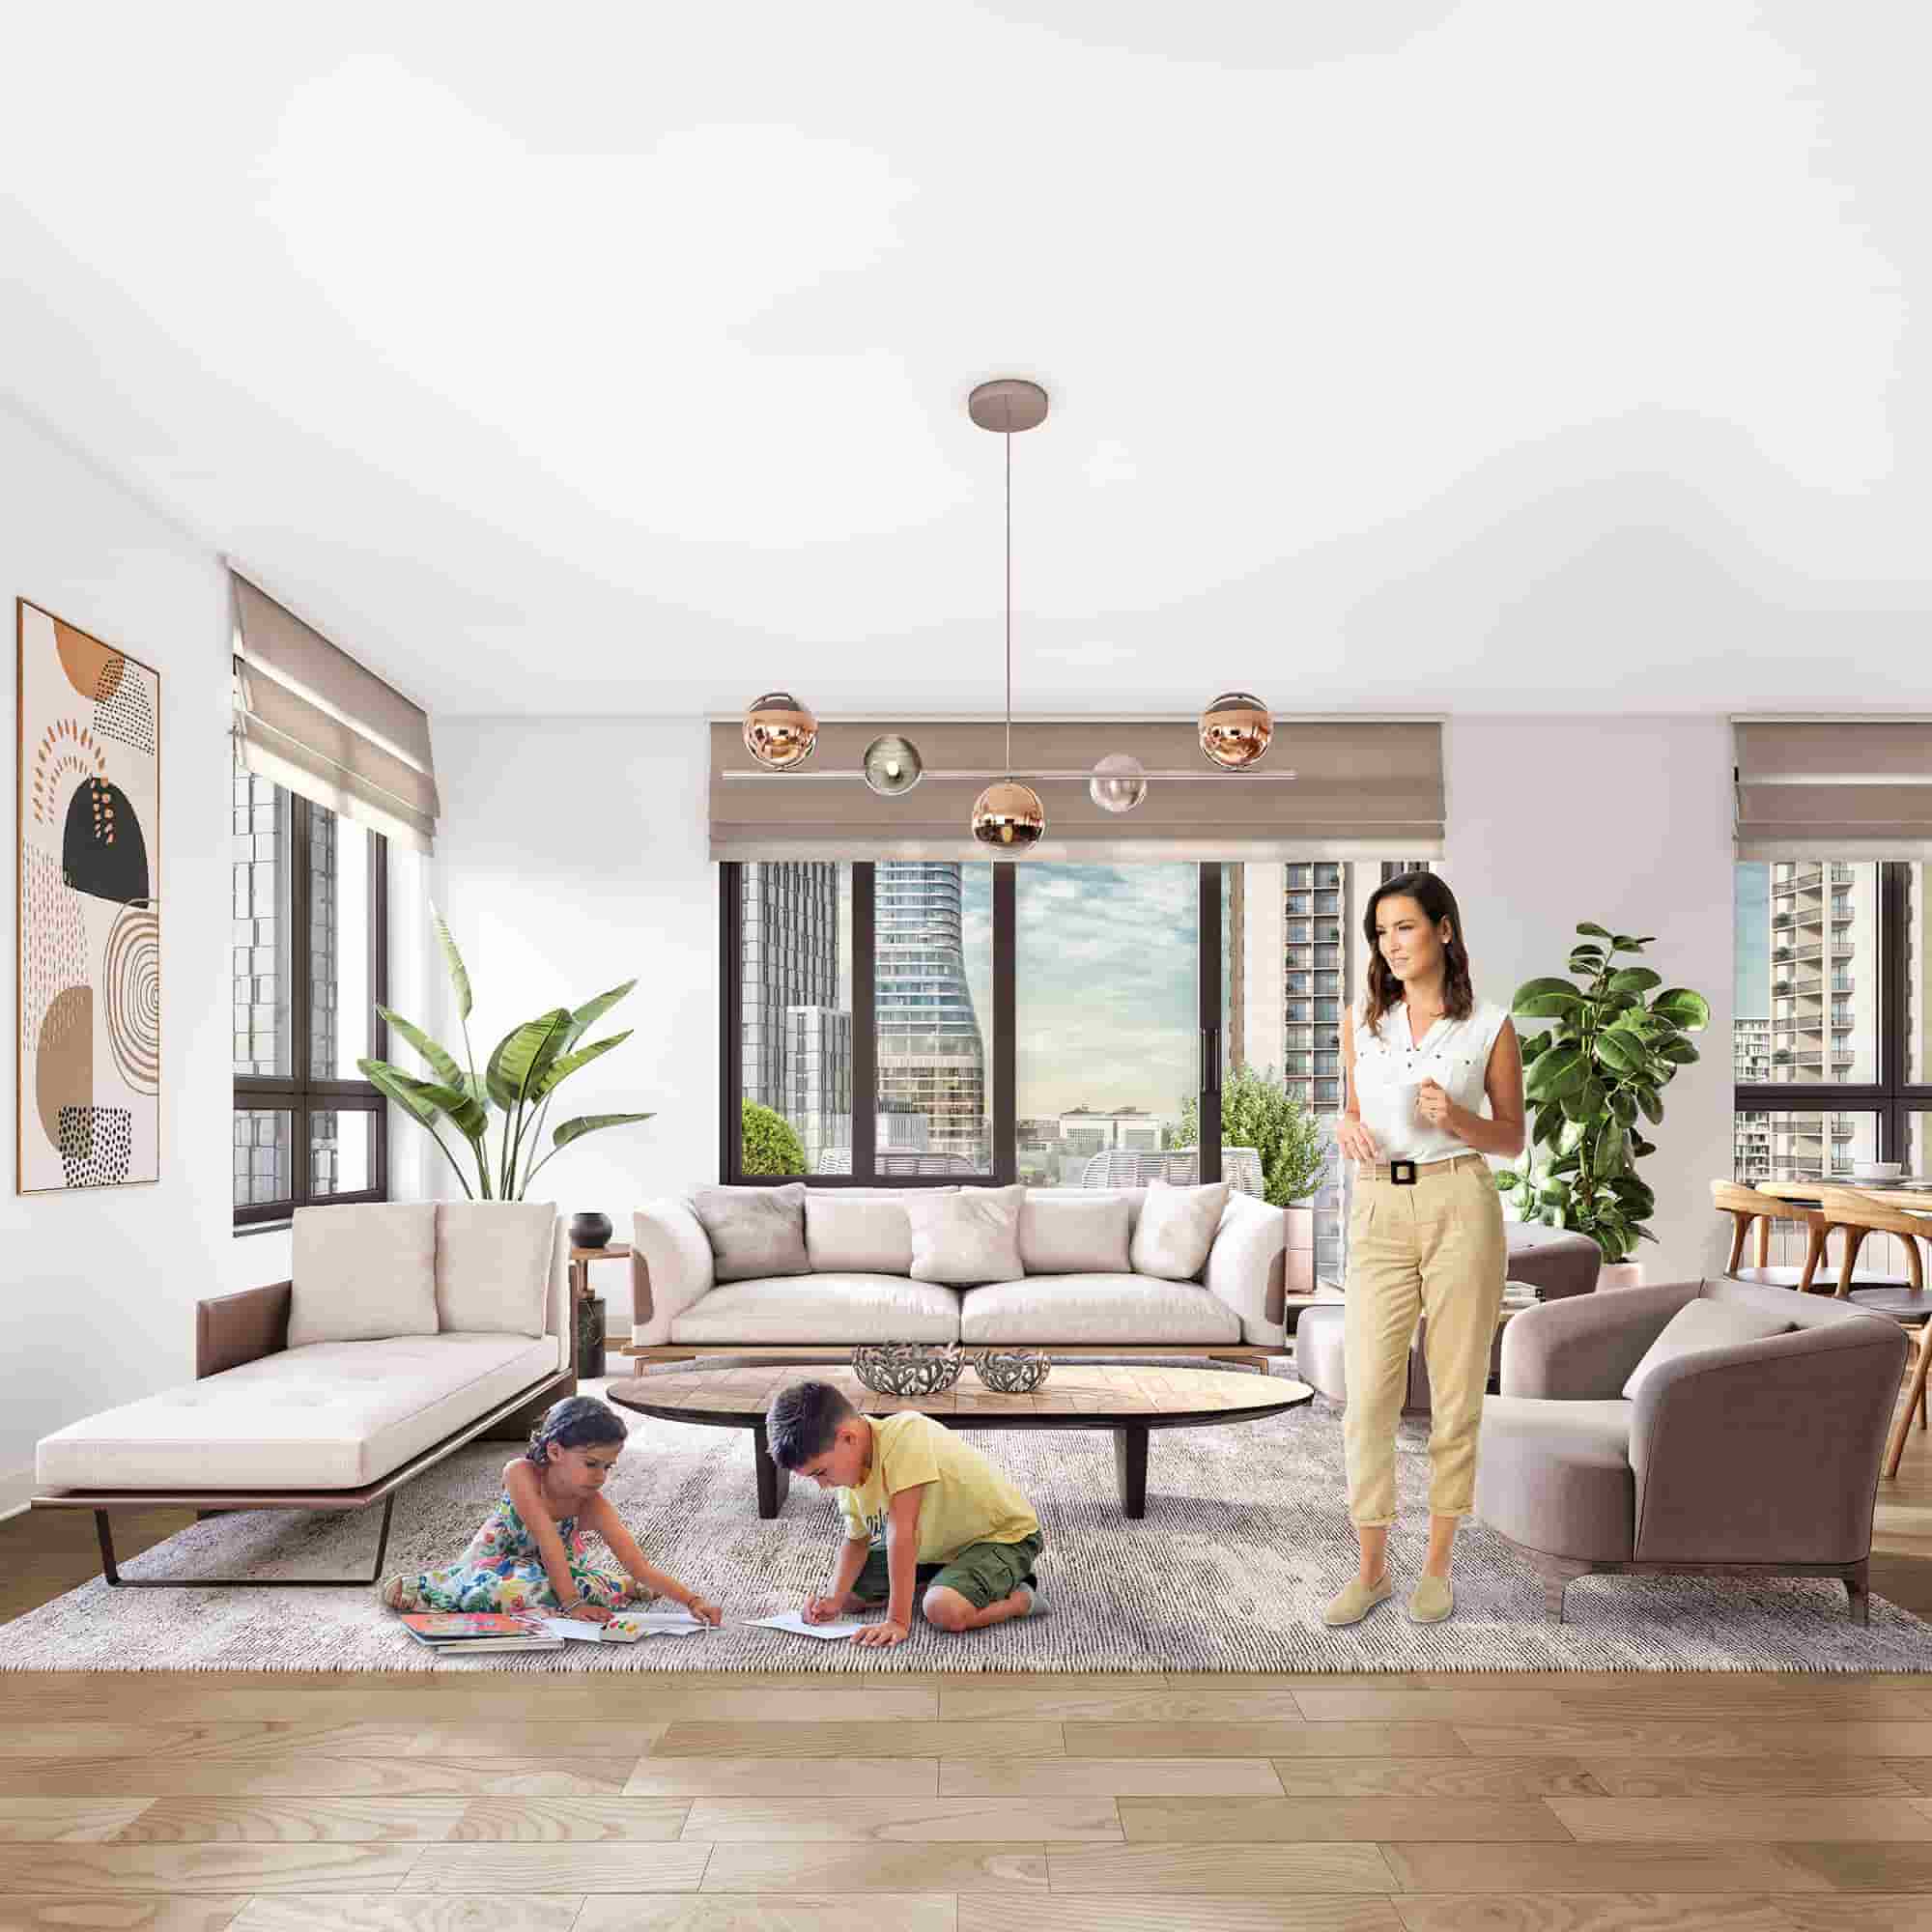 BW_P23_QU4_Living room with people 5K_low_65202a7d853b3.jpg